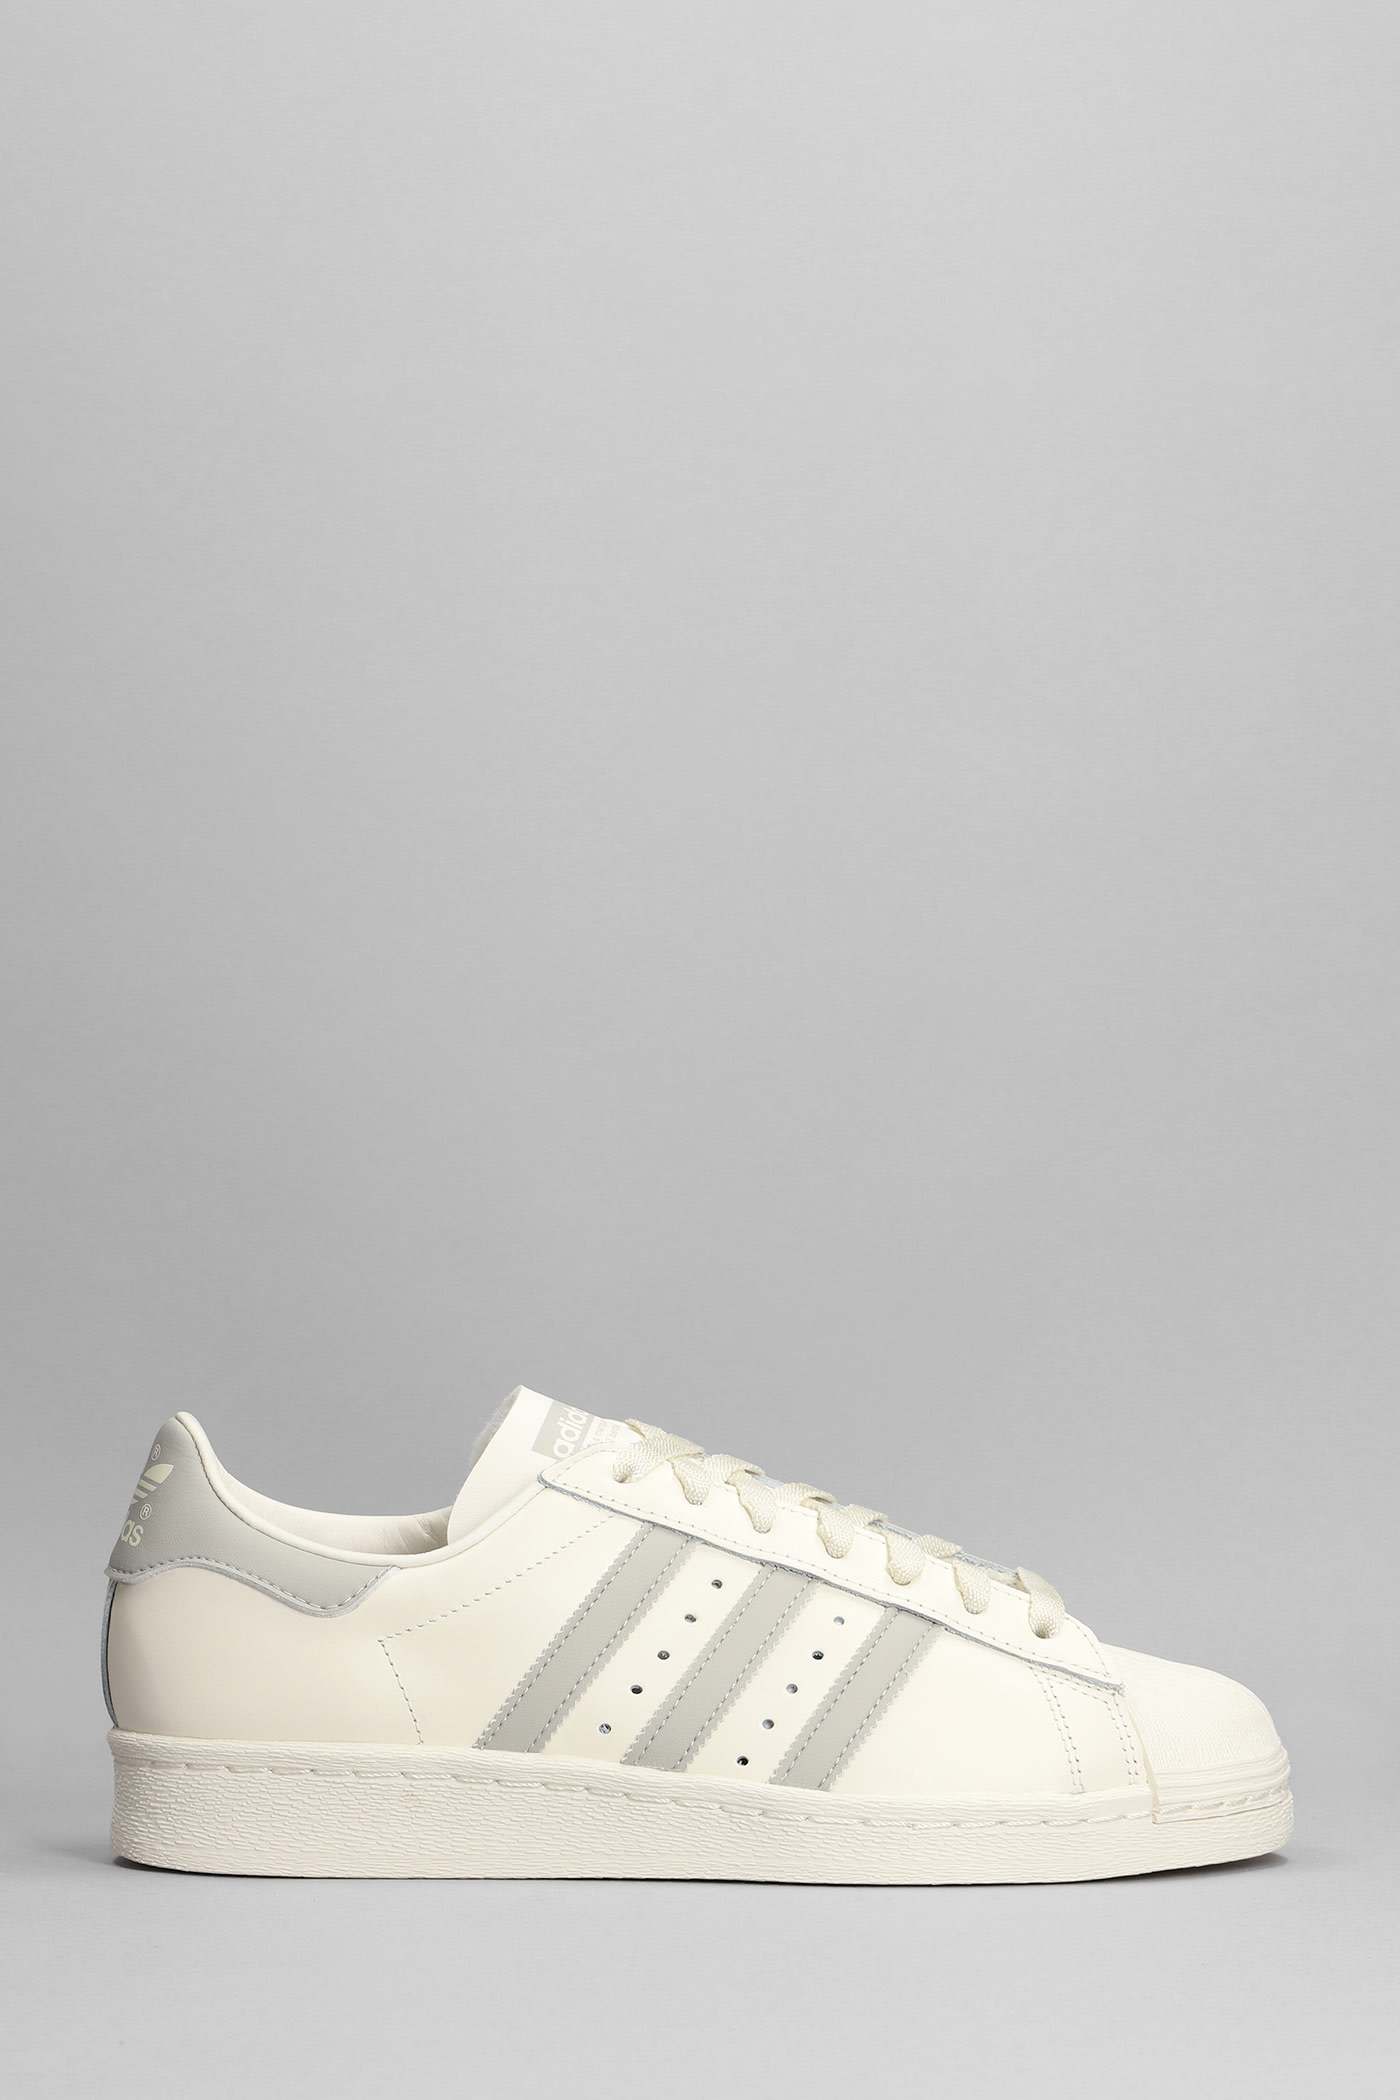 ADIDAS ORIGINALS SUPERSTAR 82 SNEAKERS IN WHITE LEATHER